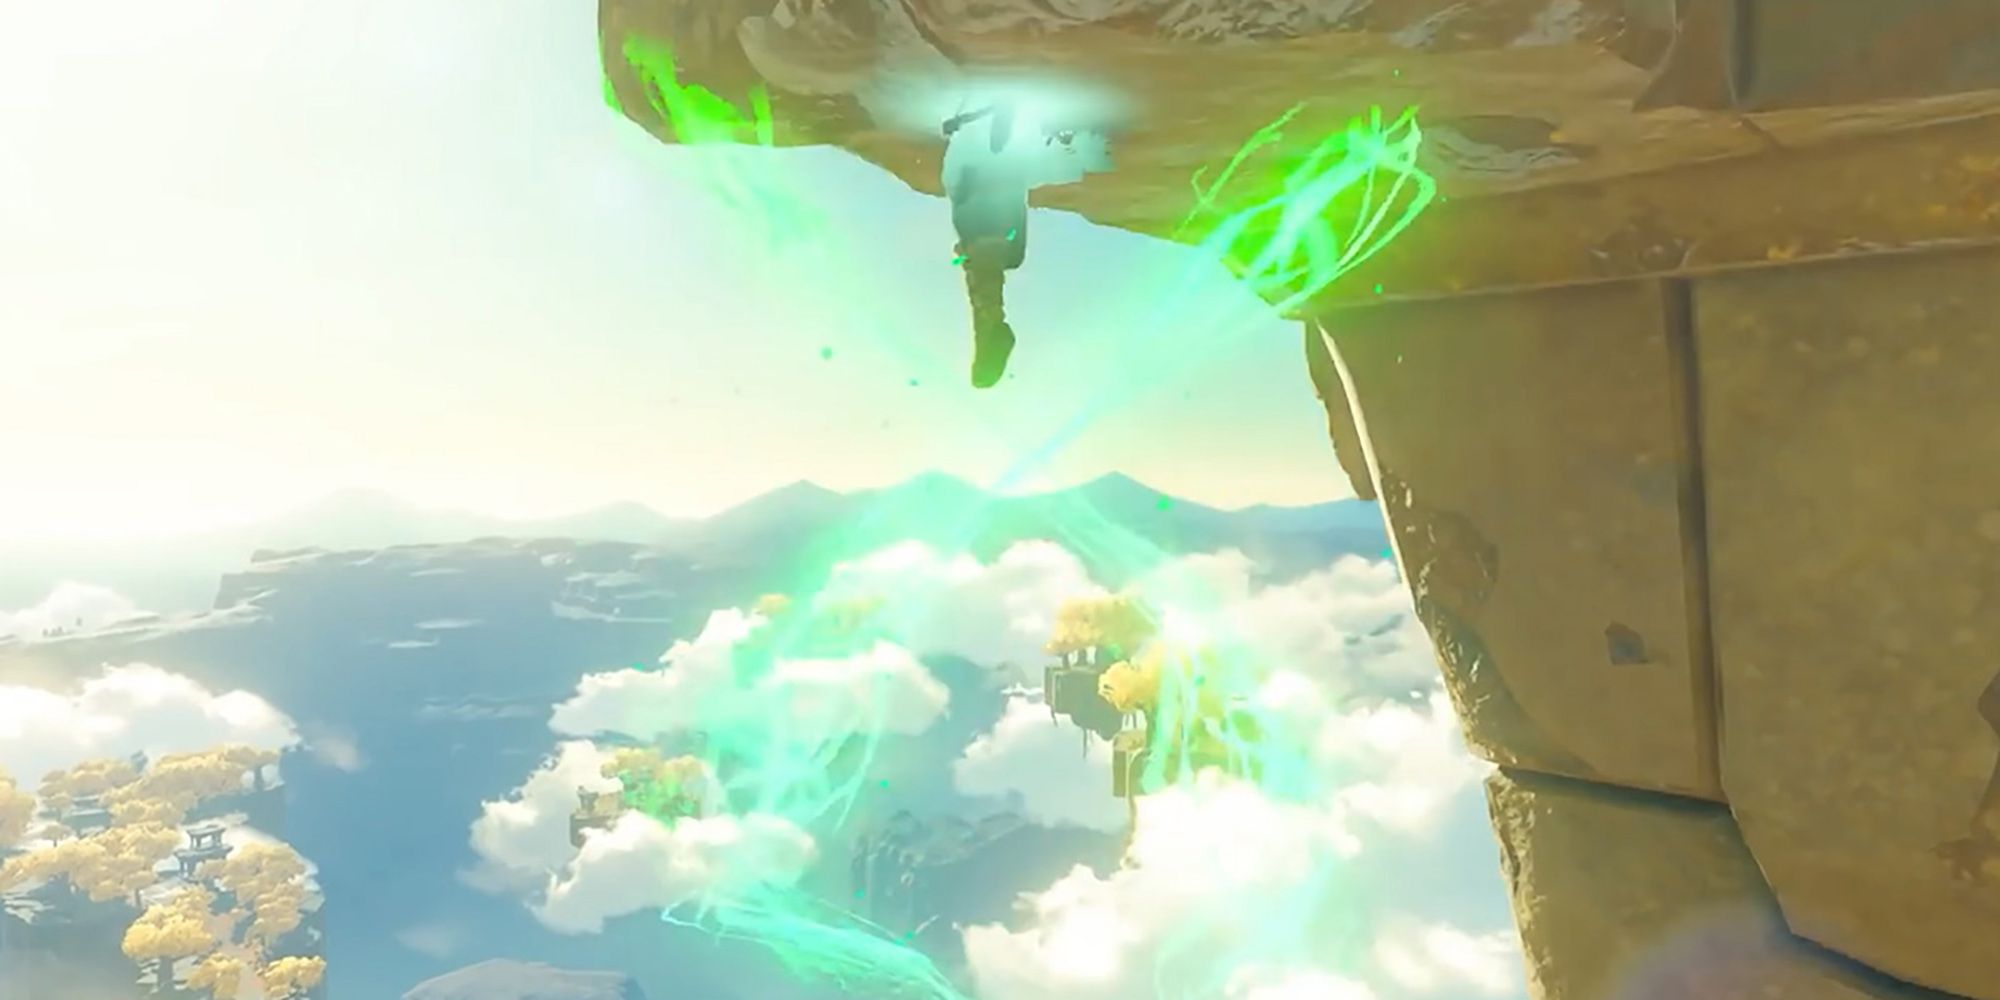 Legend Of Zelda Breath Of The Wild 2 Second Trailer - Link Using His New Arm To Phase Through Terrain